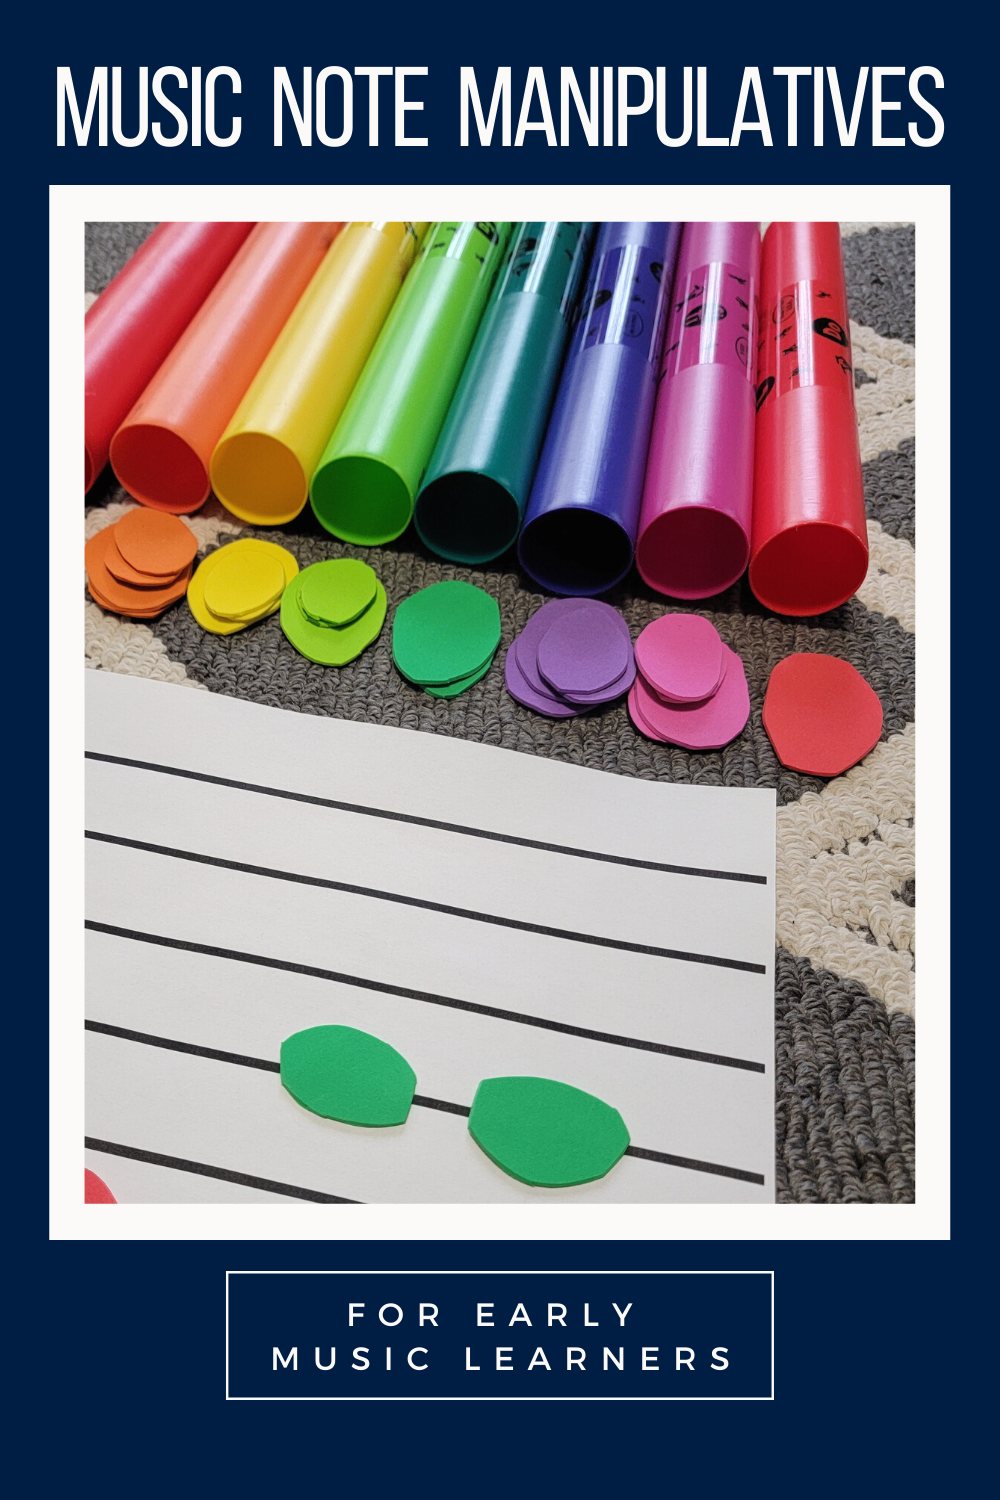 Music Note Manipulatives & Music Note Activities for Early Music Learners